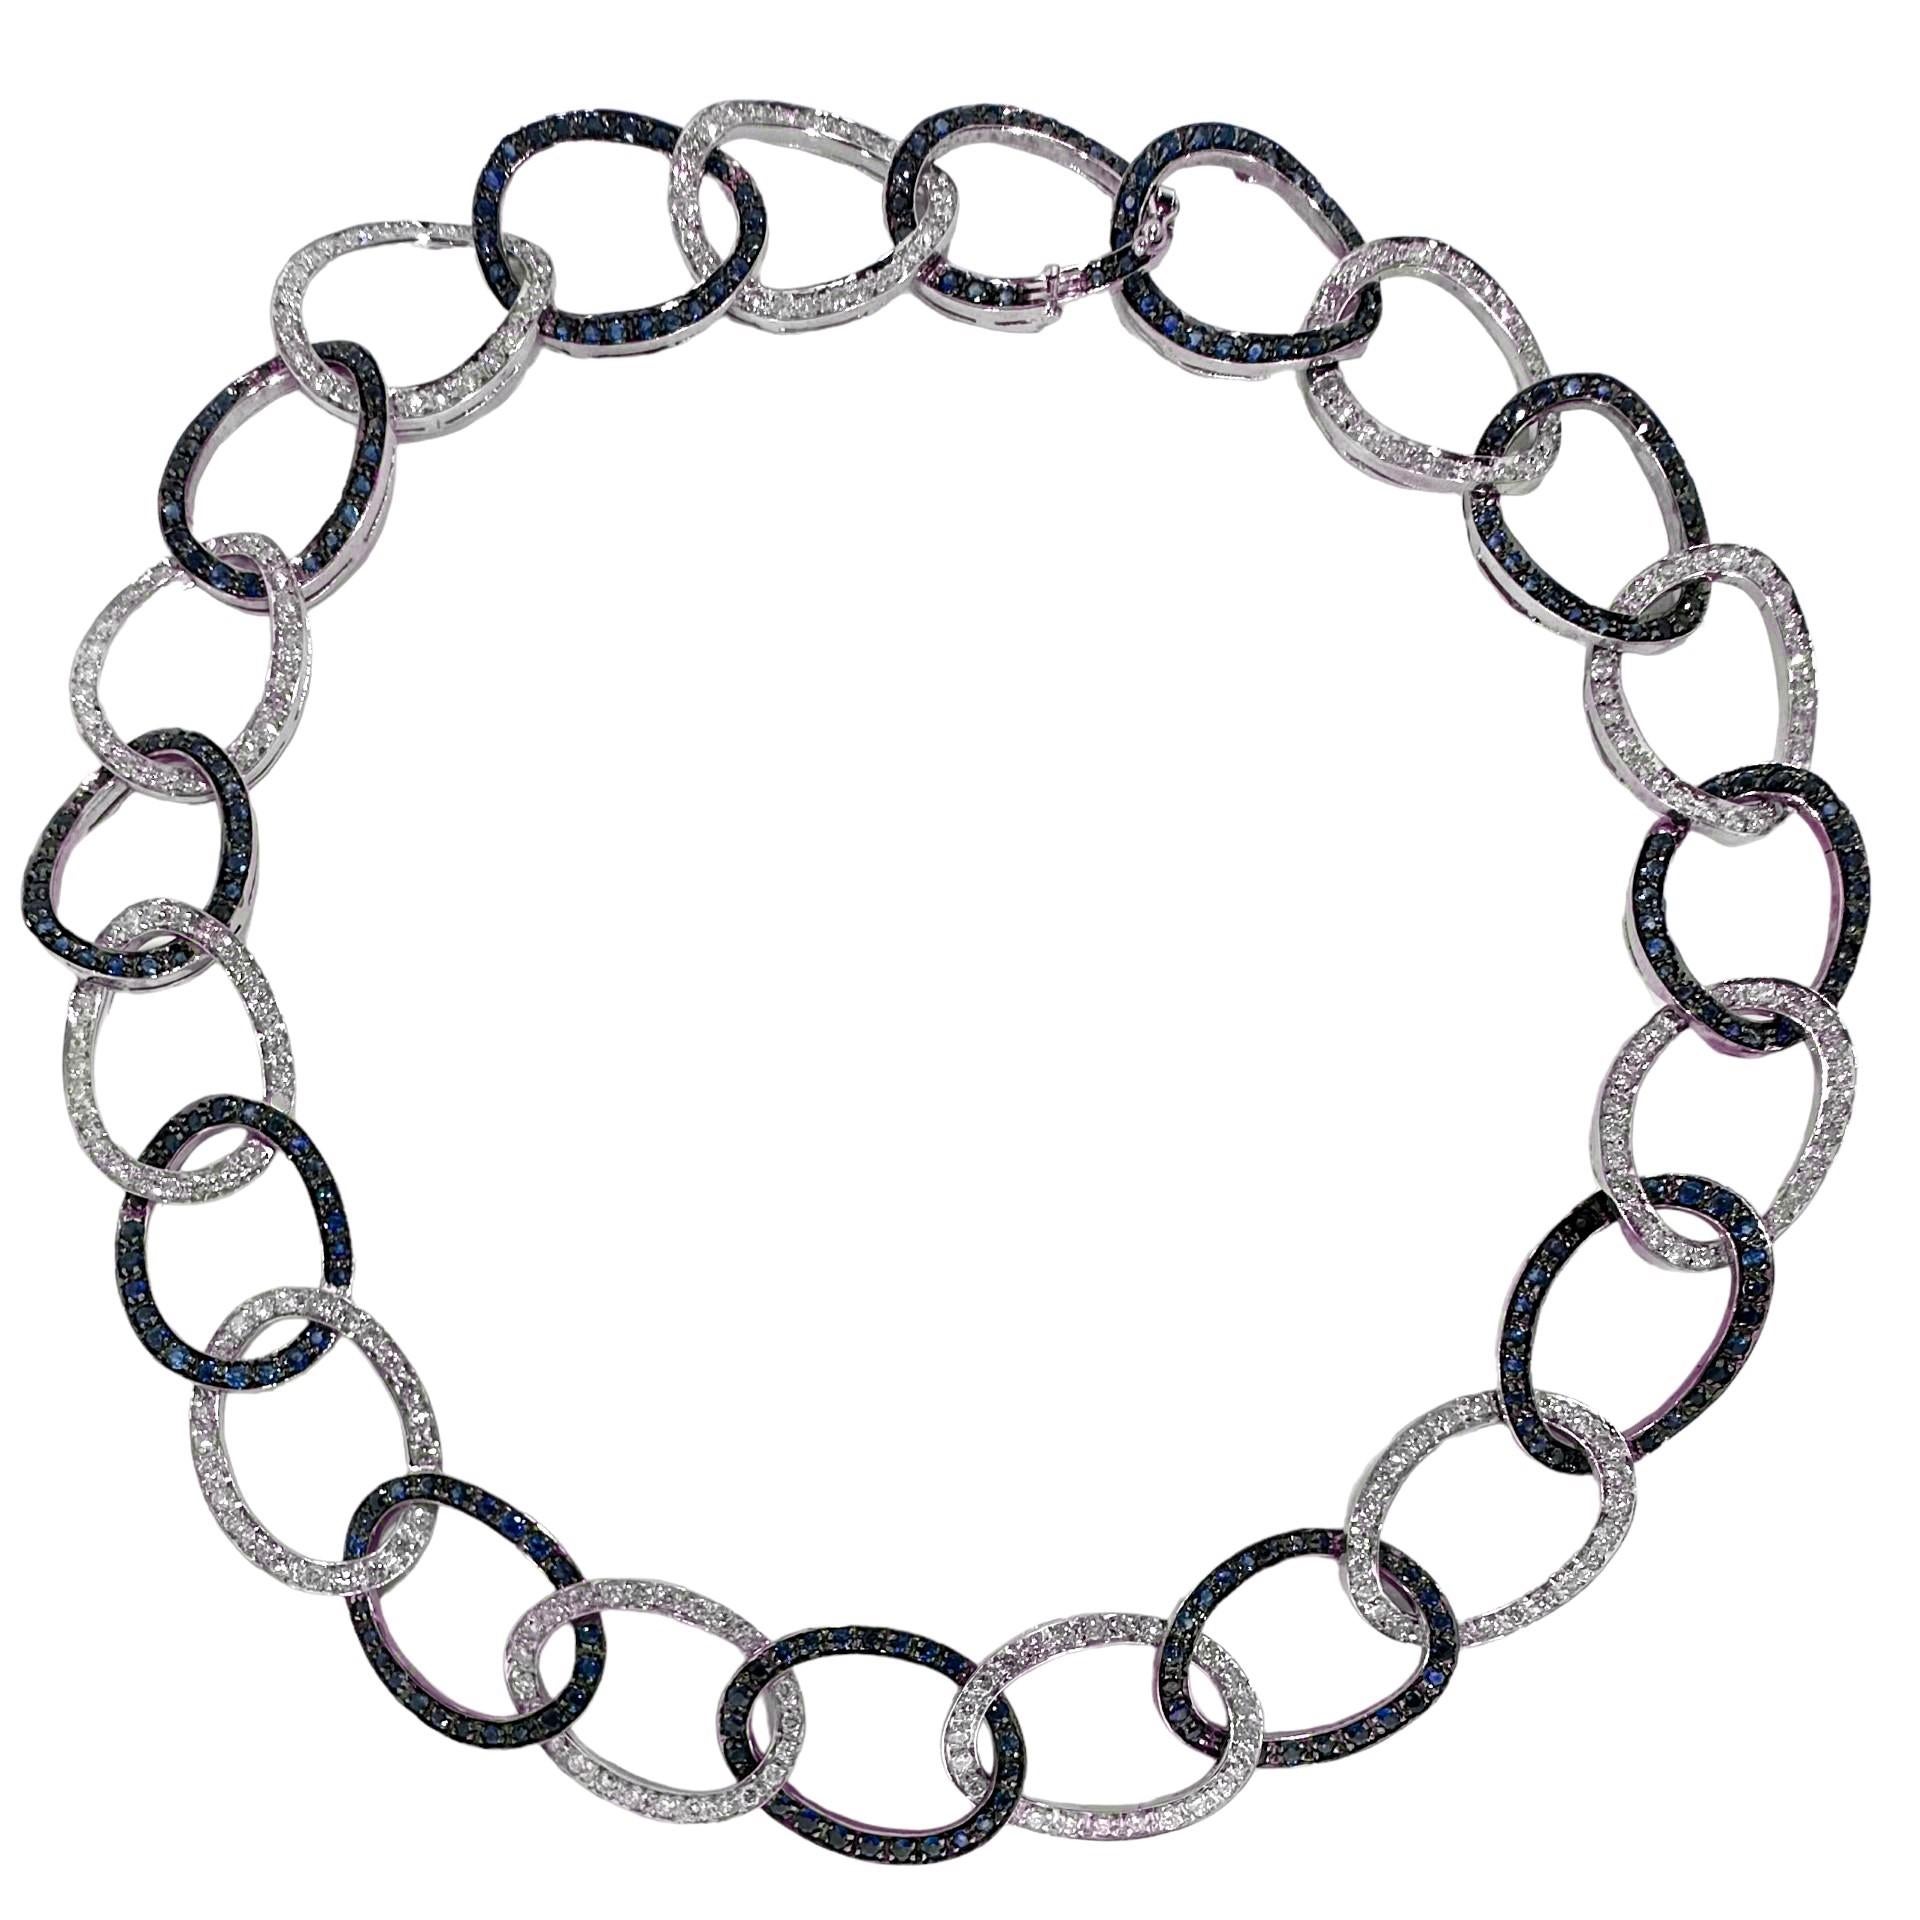 This lovely and tasteful late 20th century choker length 18k white gold necklace is set with hundreds of vivid natural blue sapphires and brilliant cut diamonds in alternating links. The contrast thus created is striking and visceral. All sapphires